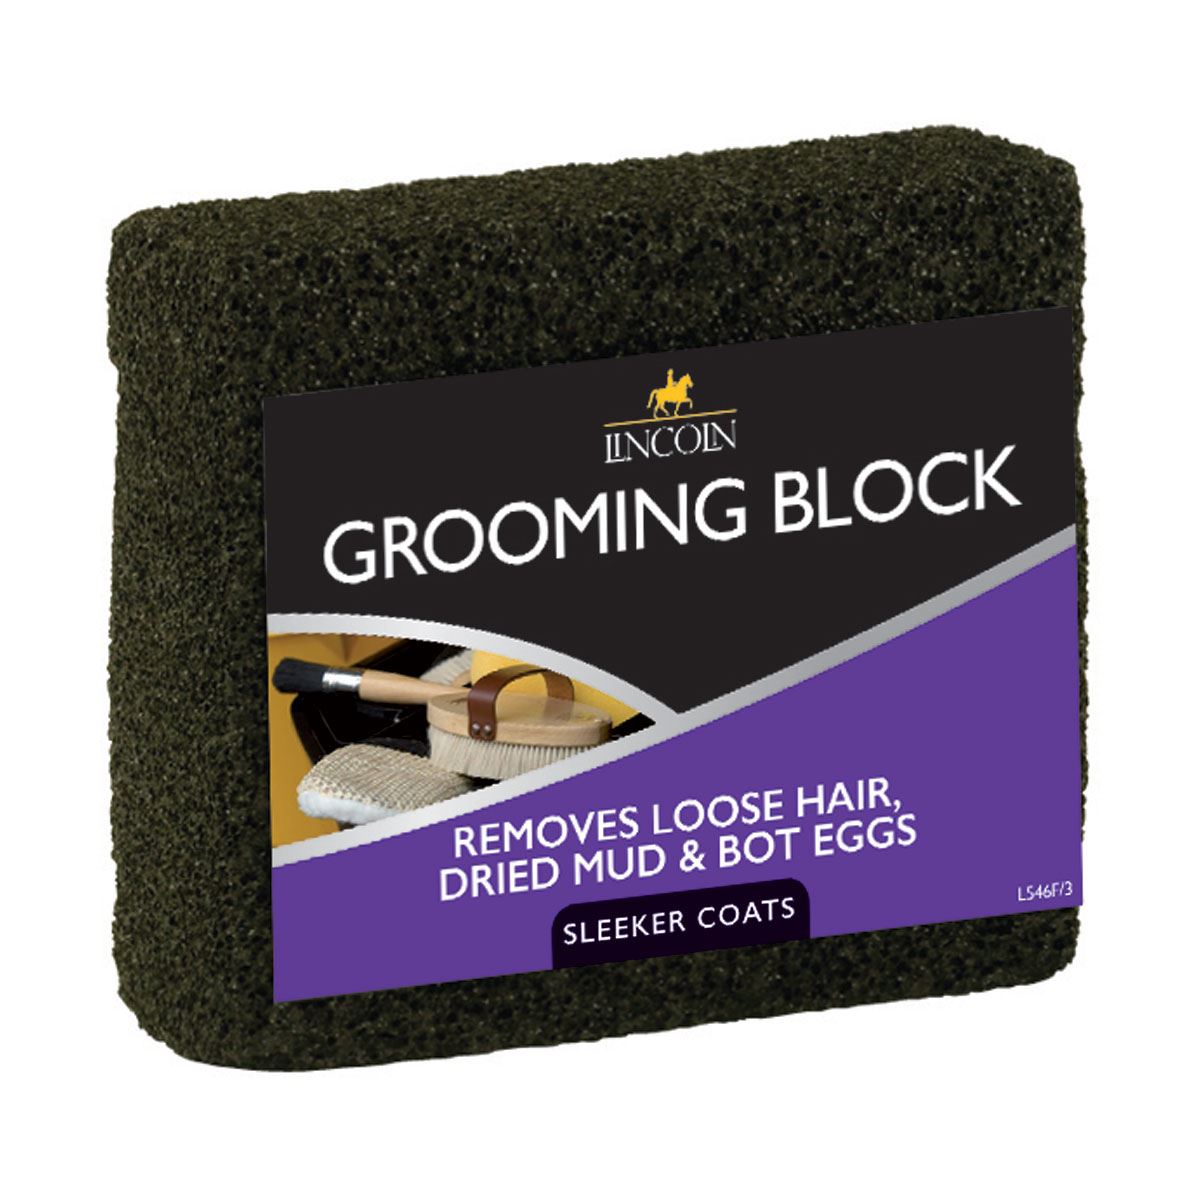 Lincoln Grooming Block - Just Horse Riders